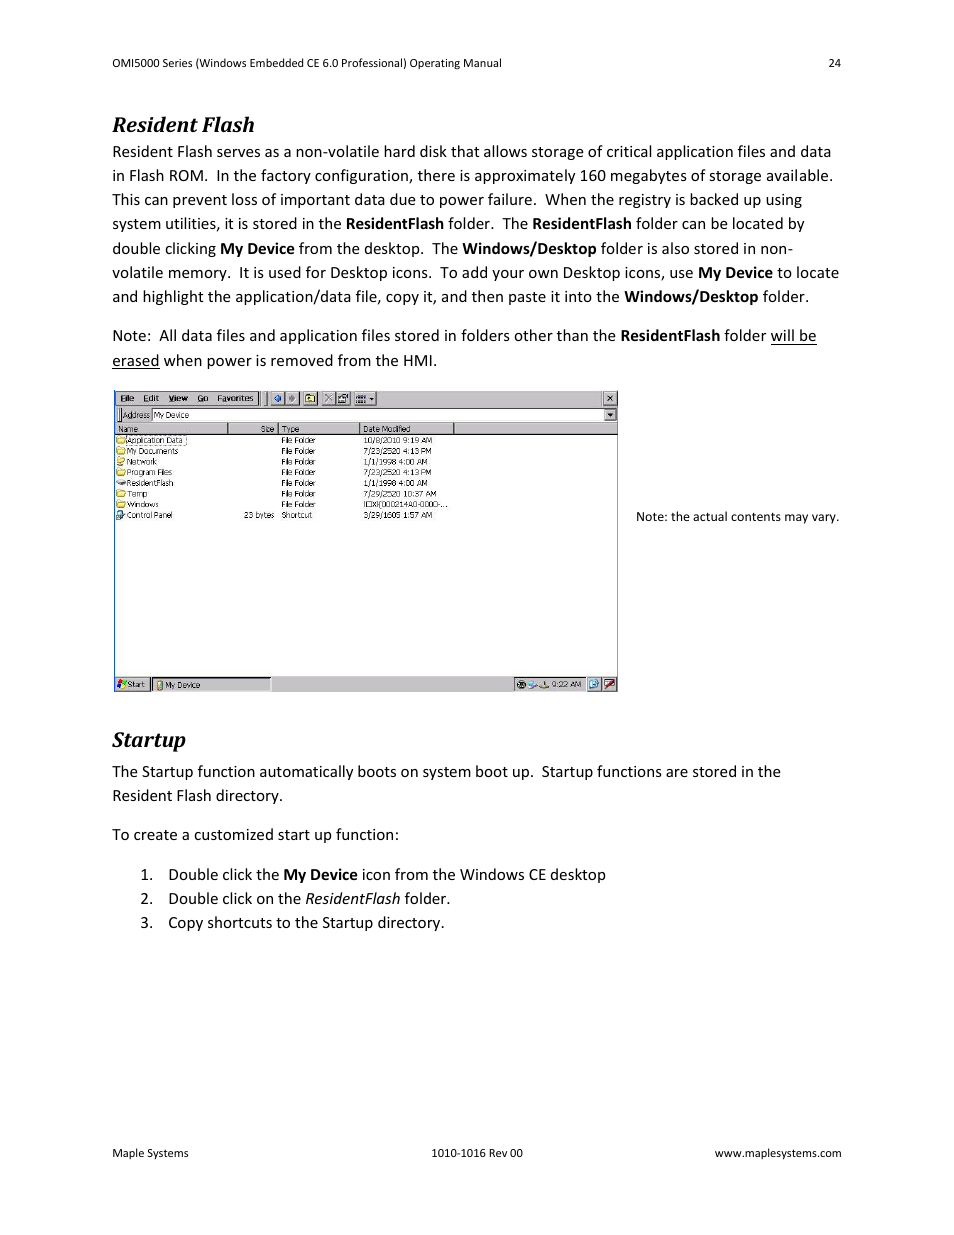 Resident flash, Startup | Maple Systems Windows CE Embedded 6.0  Professional Edition User Manual | Page 28 / 40